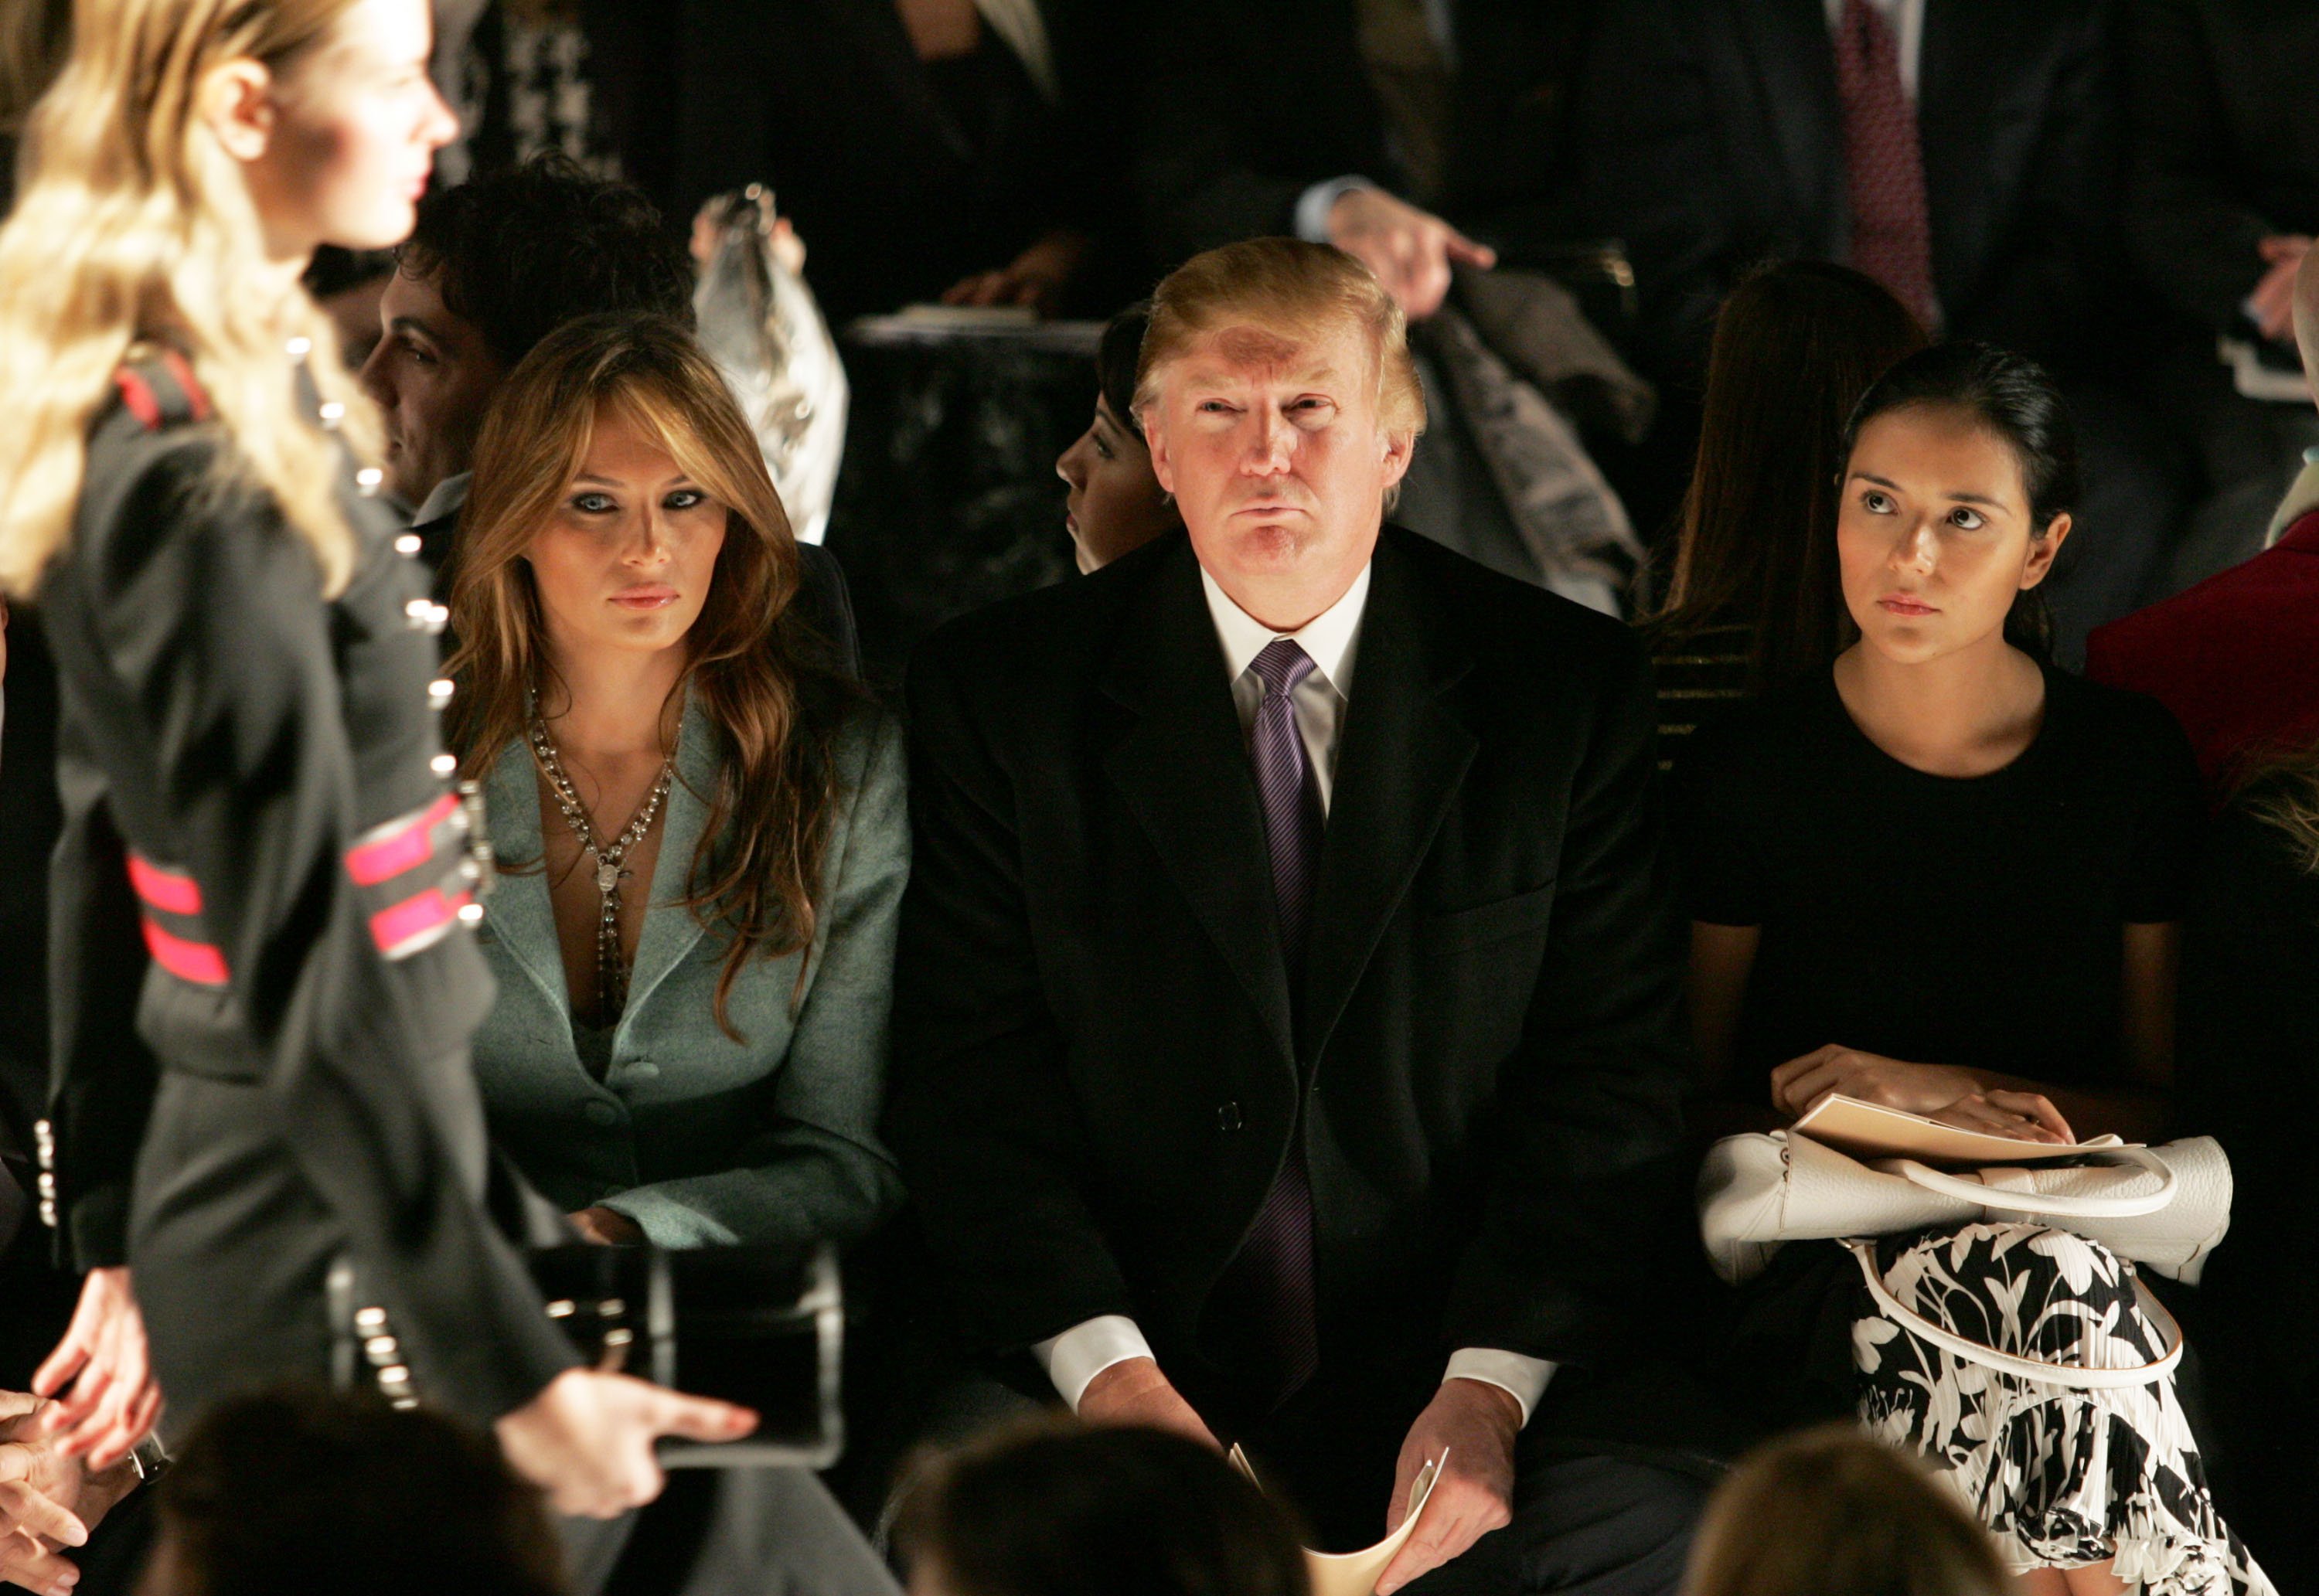 NEW YORK, NY - FEBRUARY 09: Donald Trump, his wife Melania Trump and Catalina Sandino Moreno attend the Michael Kors Fall 2005 fashion show during the Olympus Fashion Week at Bryant Park February 9, 2005 in New York City. (Photo by Peter Kramer/Getty Images)